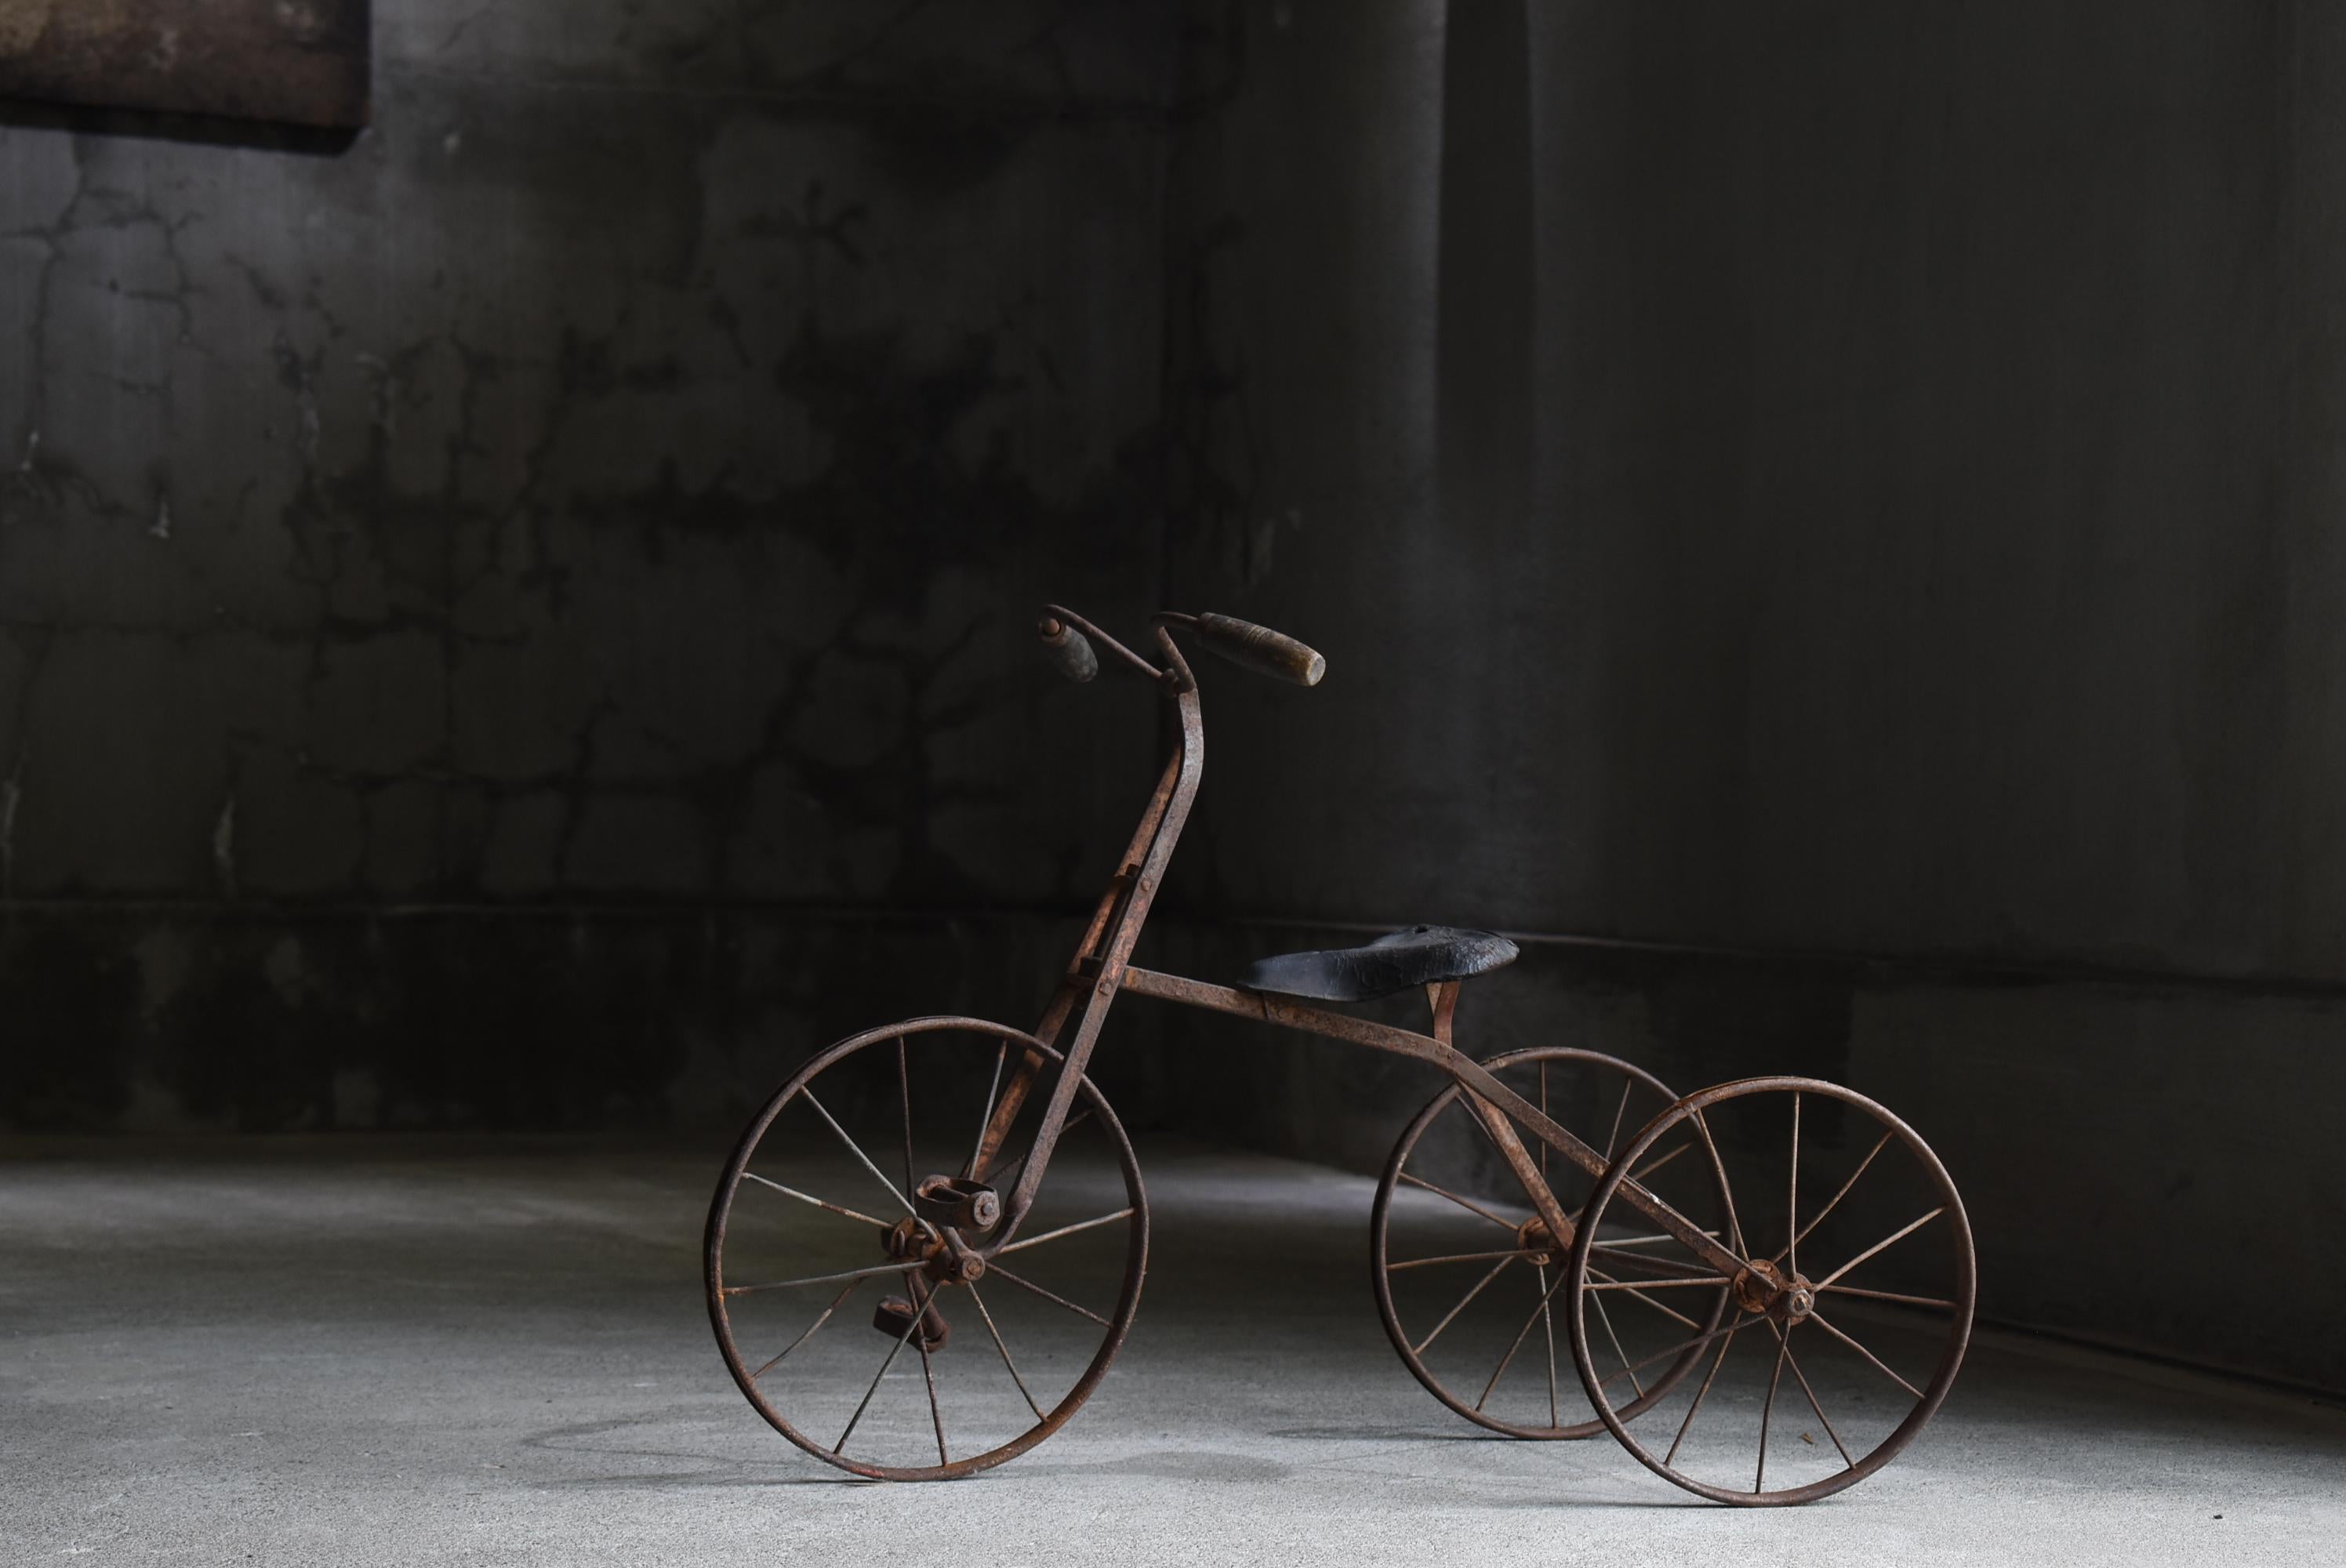 This is a very old Japanese tricycle.
This item is from the early Showa period (1900s-1940s).
The handle is made of wood and the seat is made of leather.
Everything else is made of iron.

It is a miracle that it remains in this condition to this